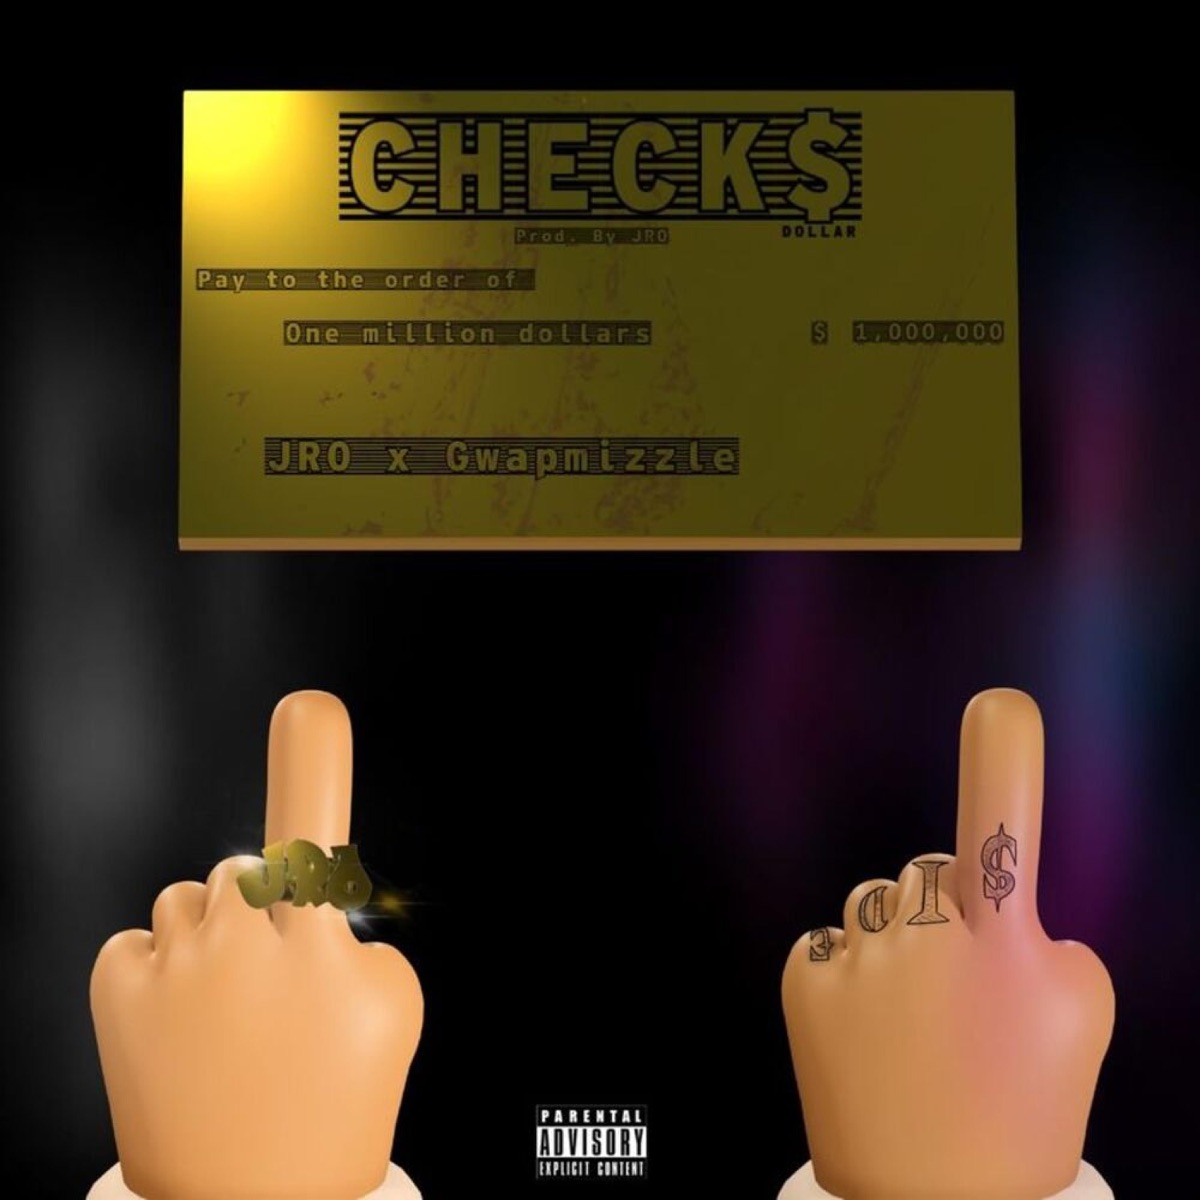 Checkmath / Gambito - Single - Album by VEZZE - Apple Music